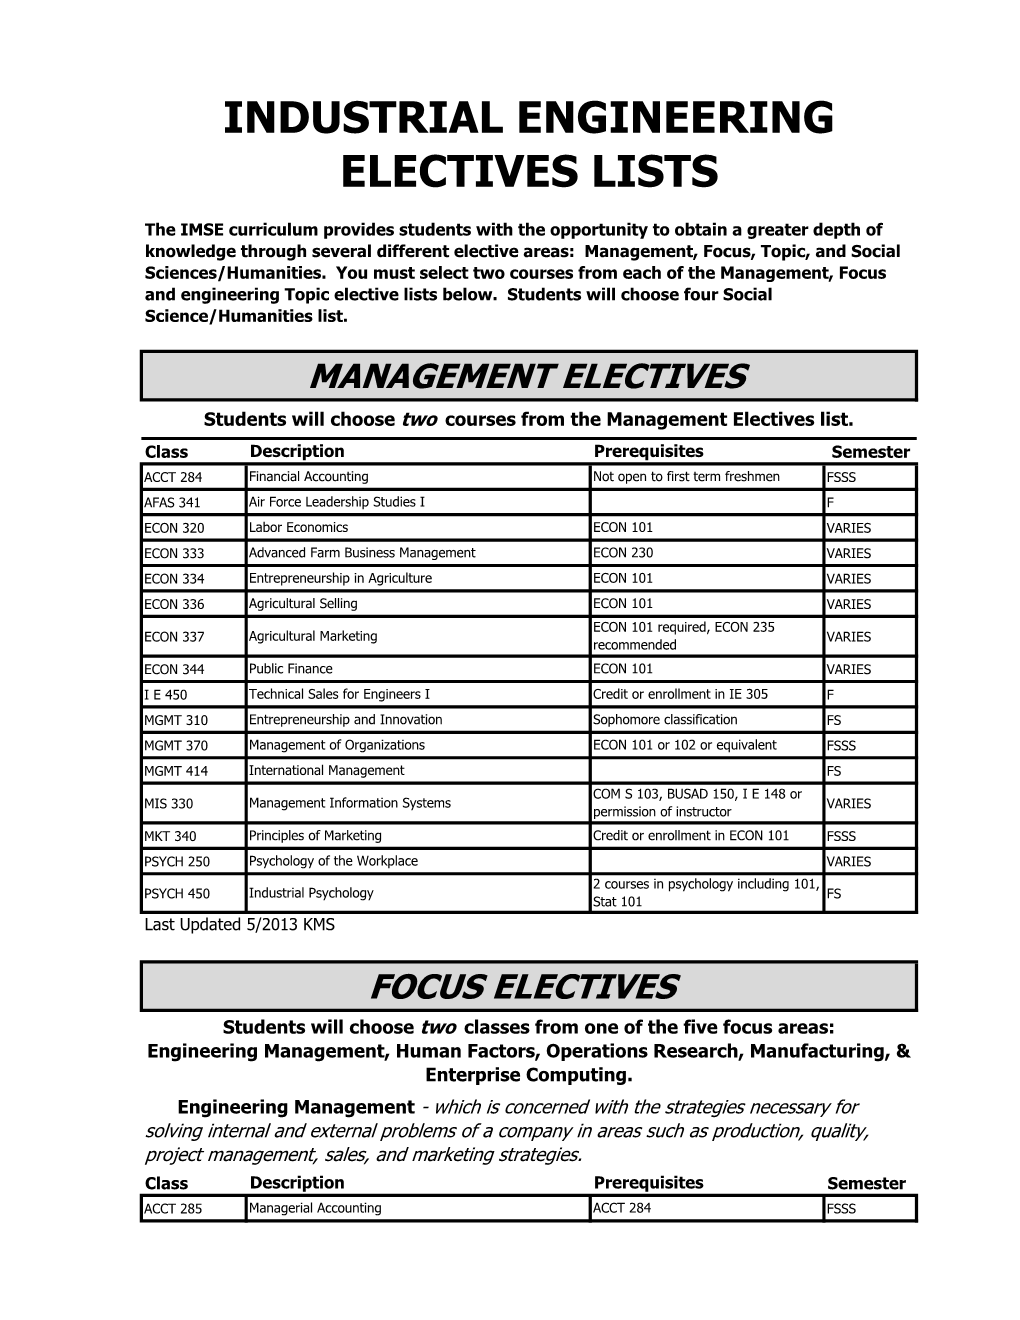 Industrial Engineering Electives Lists